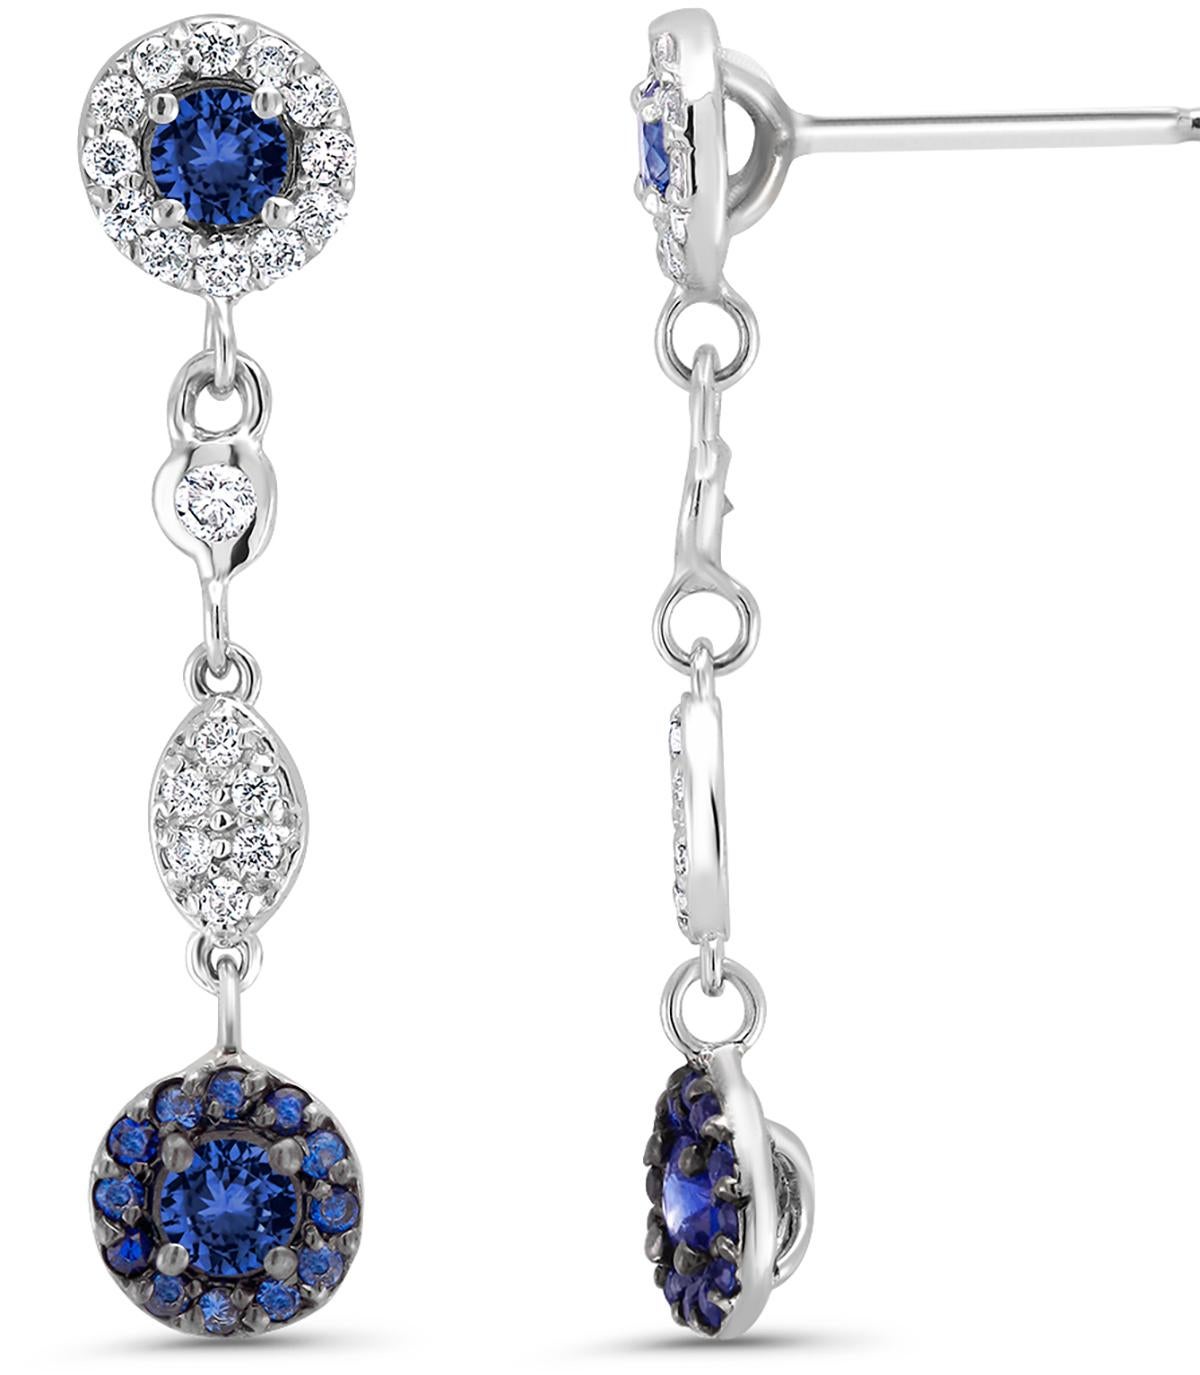 Round Cut Sapphire and Diamond Gold One Inch Long Drop Earrings Weighing 1.70 Carat 